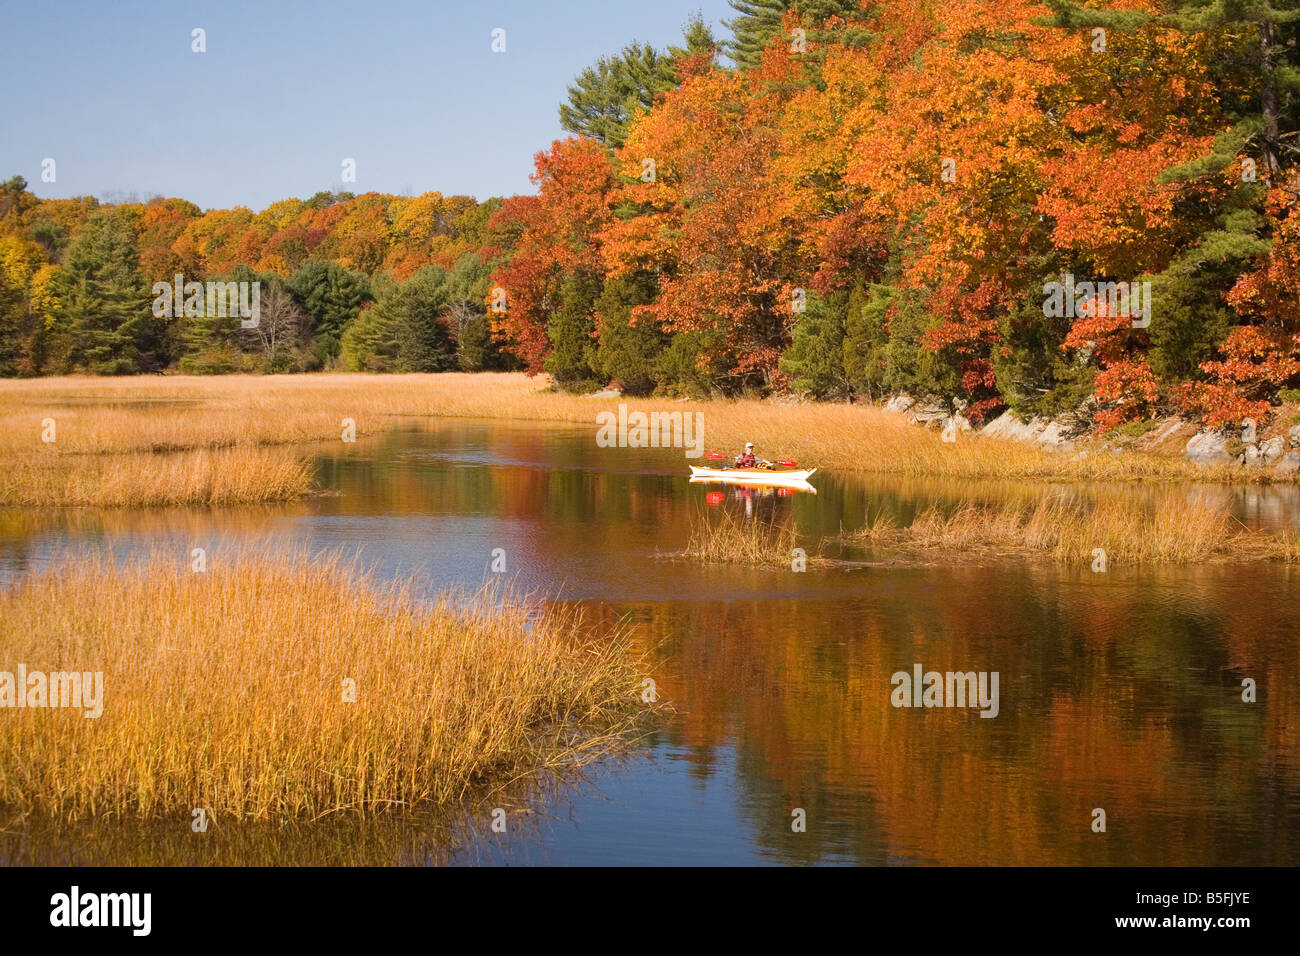 A man in a kayak paddles along an estuary, surrounded by the vividly colored foliage of an autumn day. Stock Photo